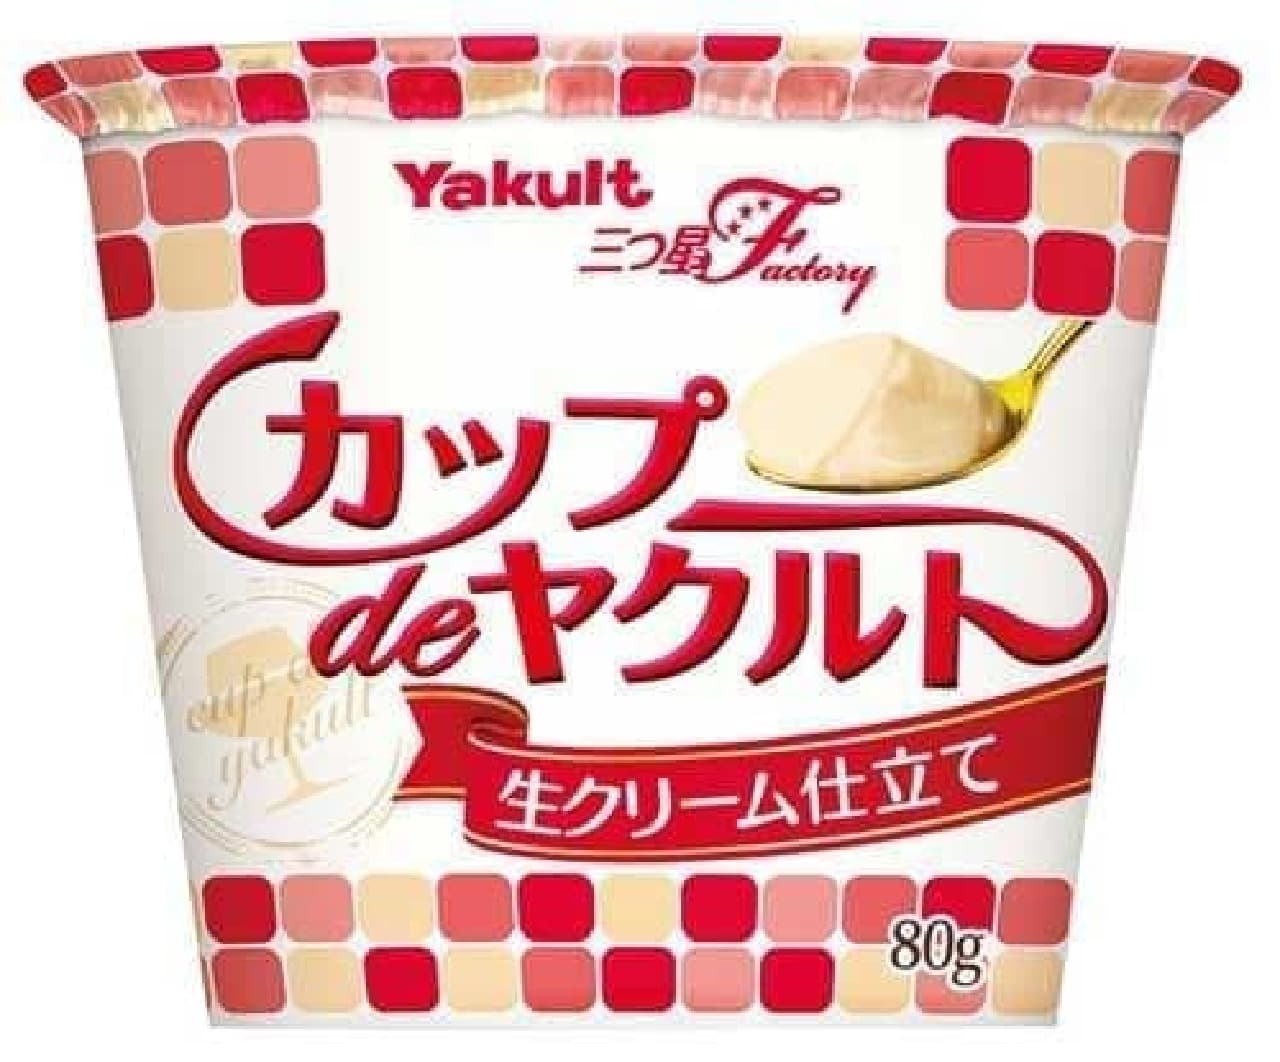 "Eat Yakult" that you can enjoy a smooth texture